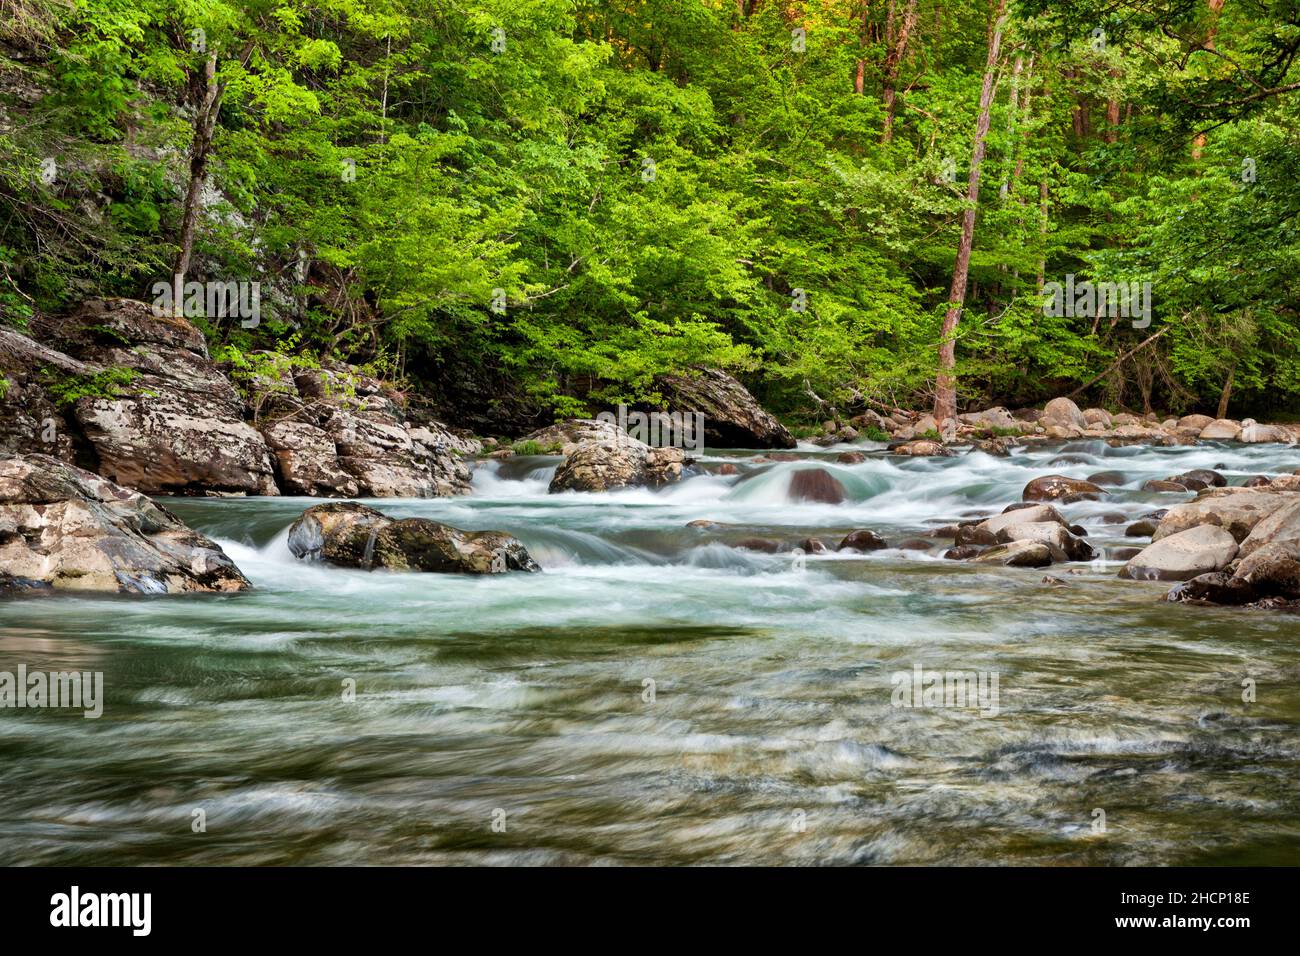 USA, Tennessee, Great Smoky Mountains National Park, Little Pigeon River at Greenbrier, #1 Stock Photo